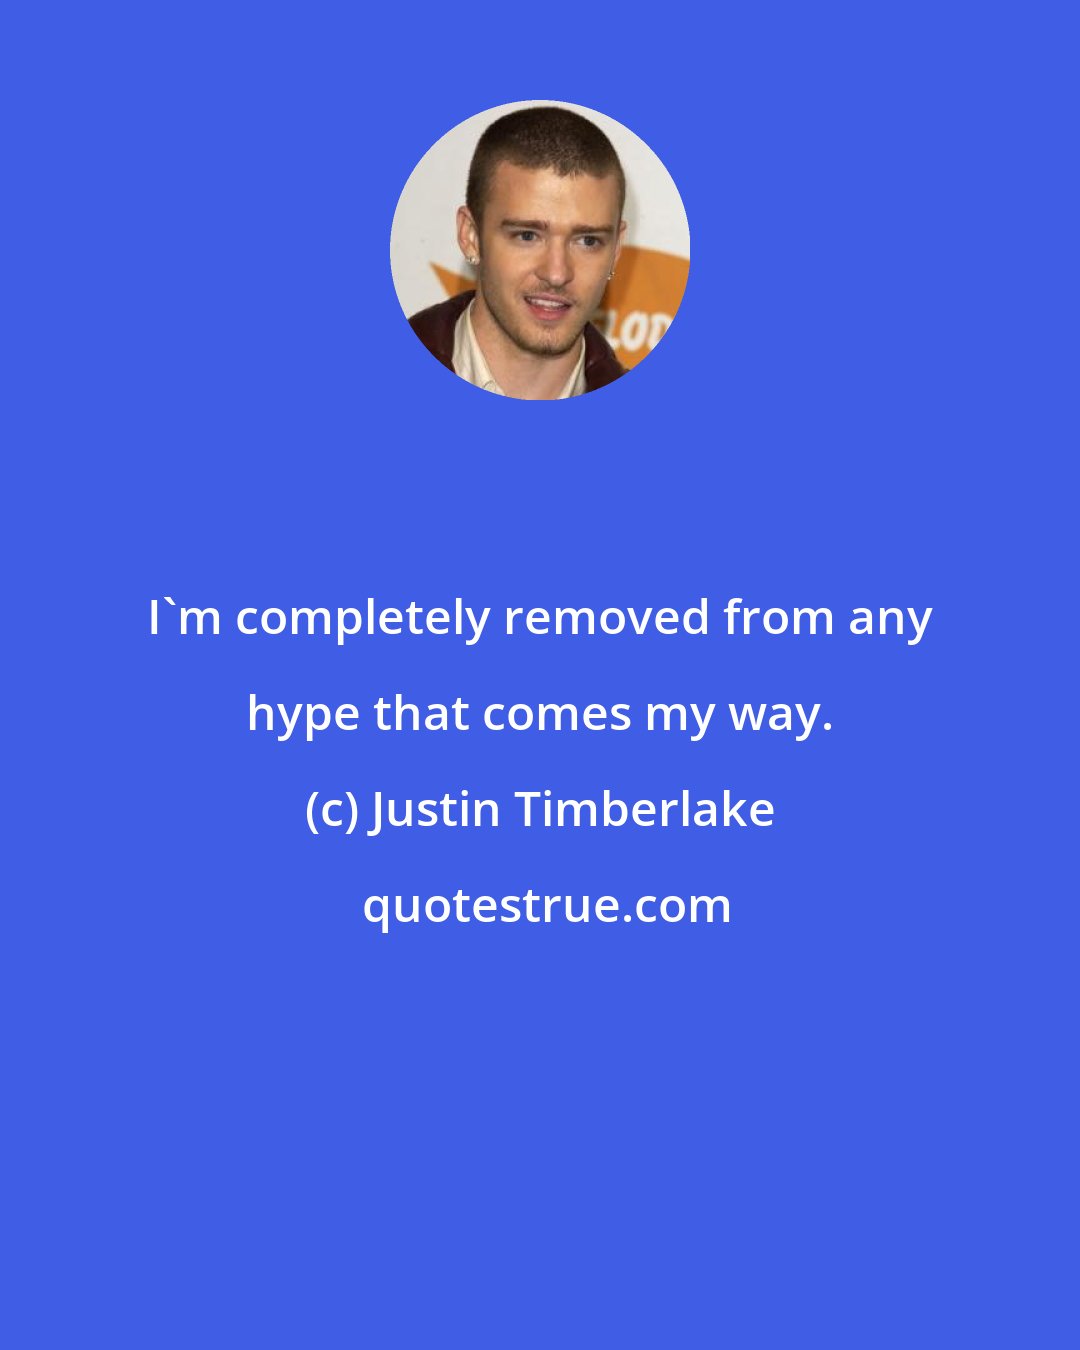 Justin Timberlake: I'm completely removed from any hype that comes my way.